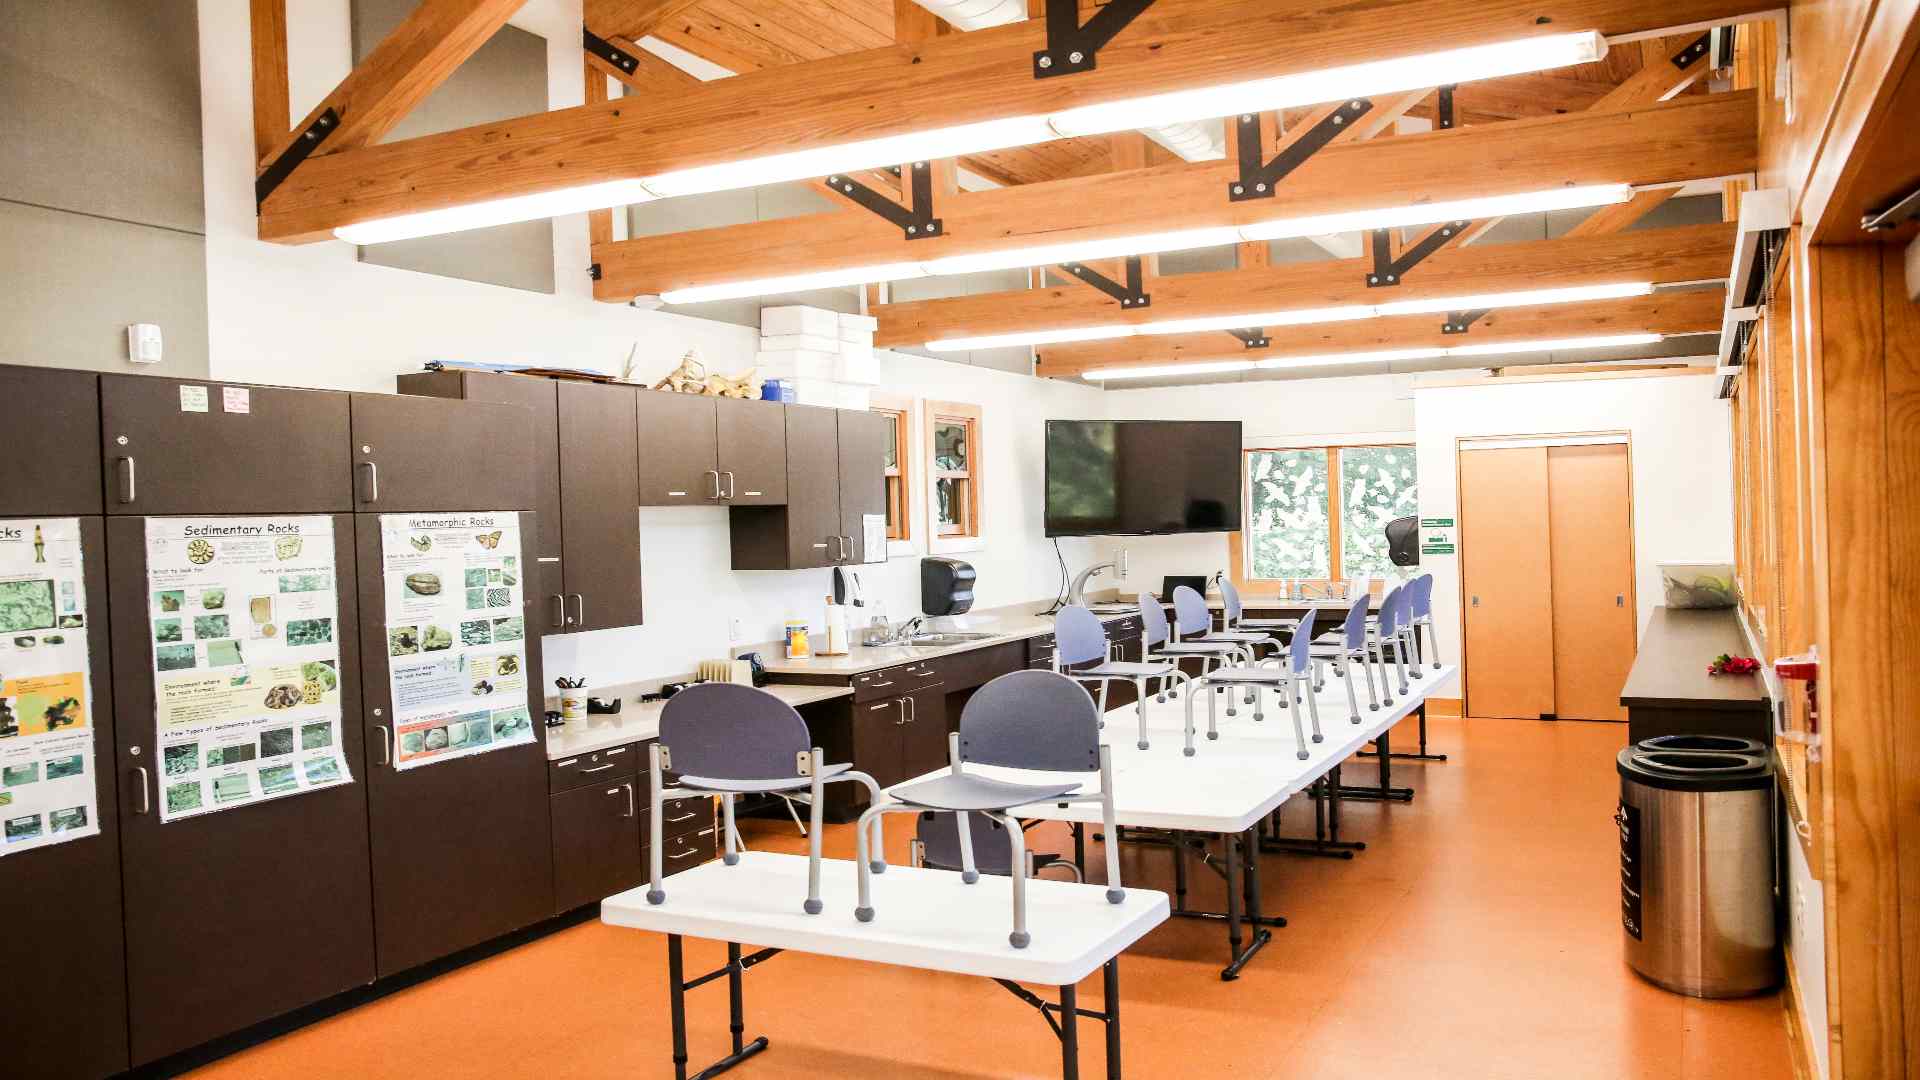 Annie Louise Wilkerson MD NP Classroom